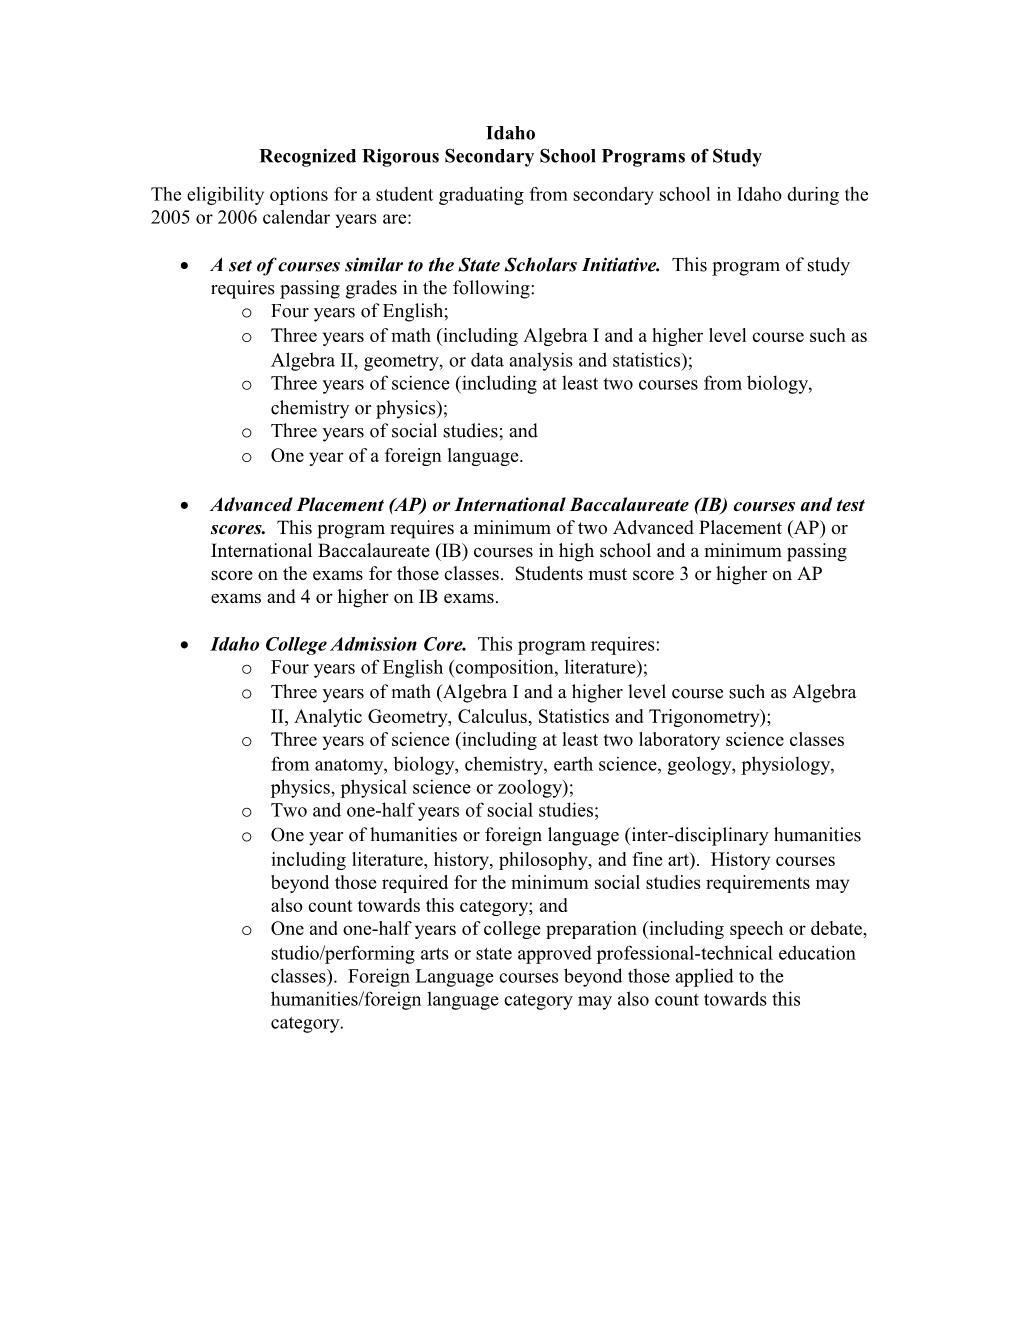 Academic Competitiveness Grants - Attachment to Idaho Letter - 2006 (MS Word)